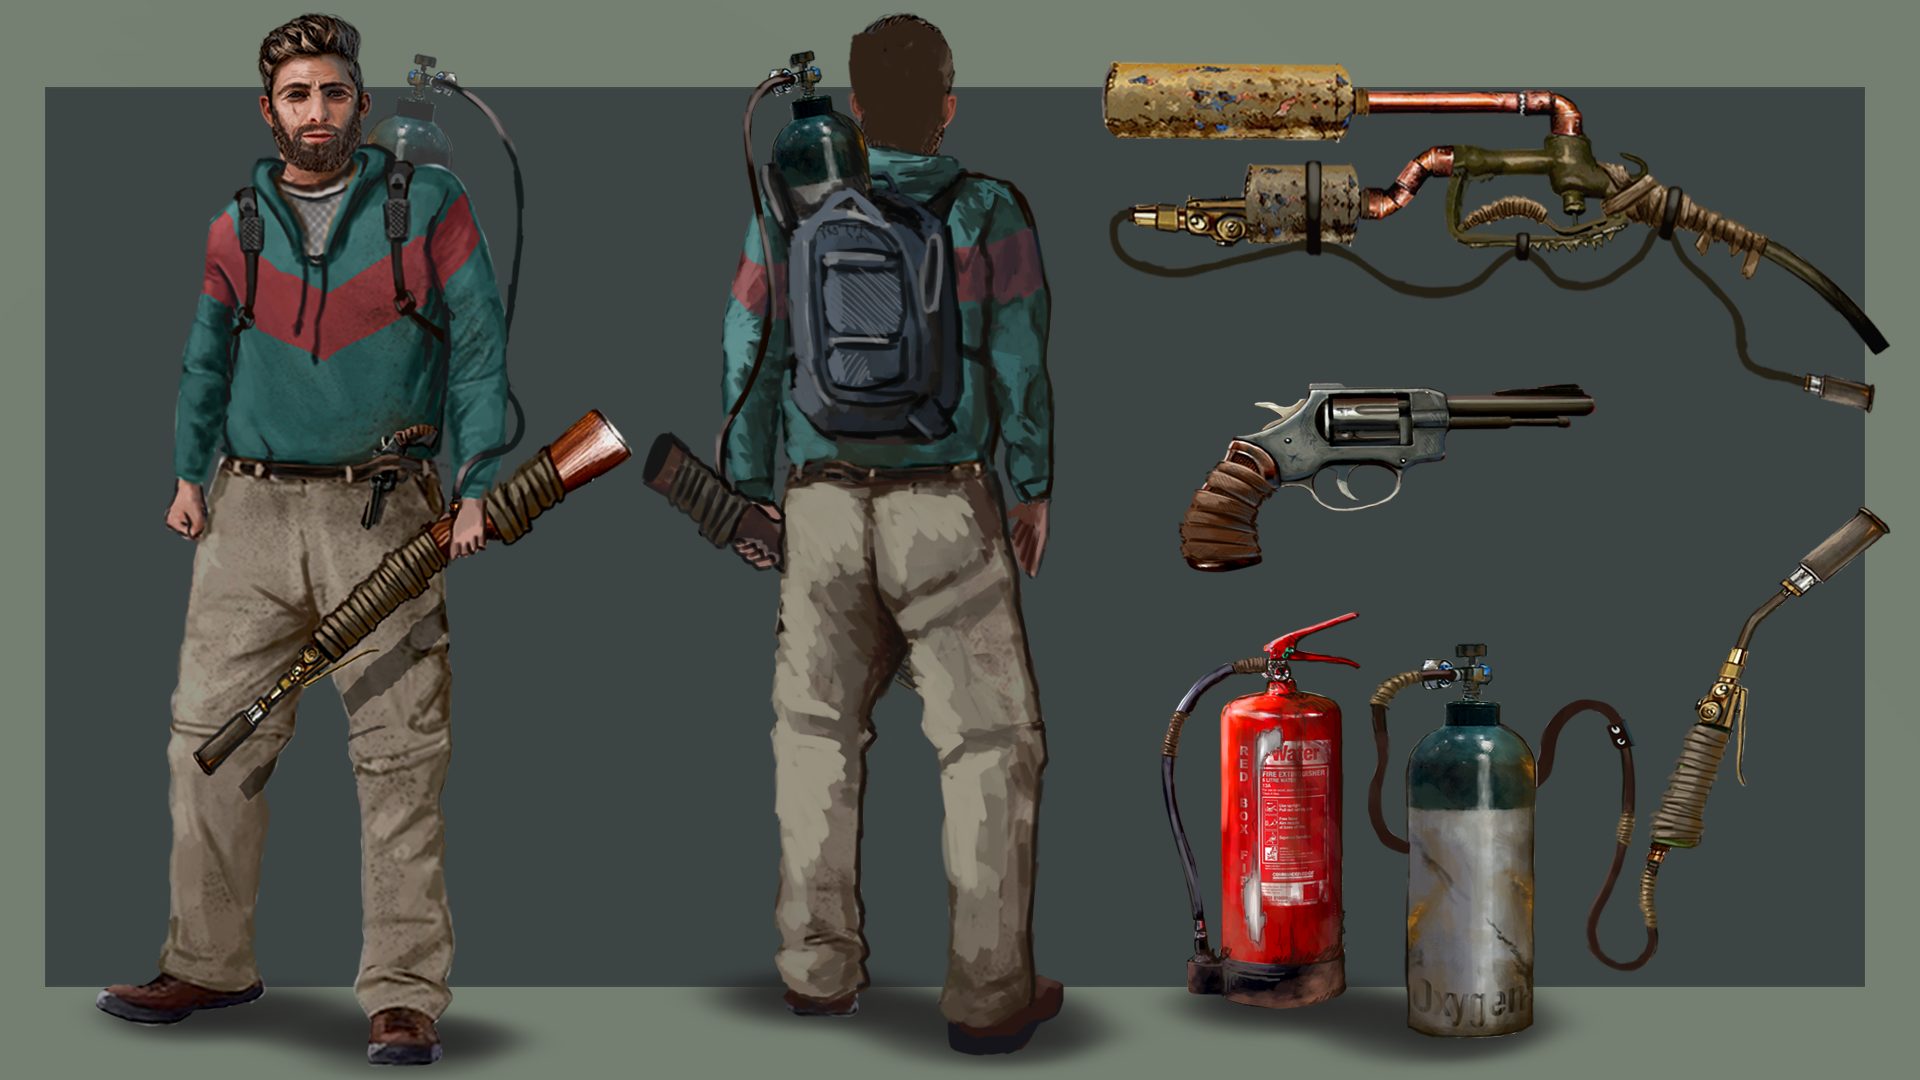 BA Game Art and Design work by Luke Clare showing a character design front and back view, with a range of weapons to the side.